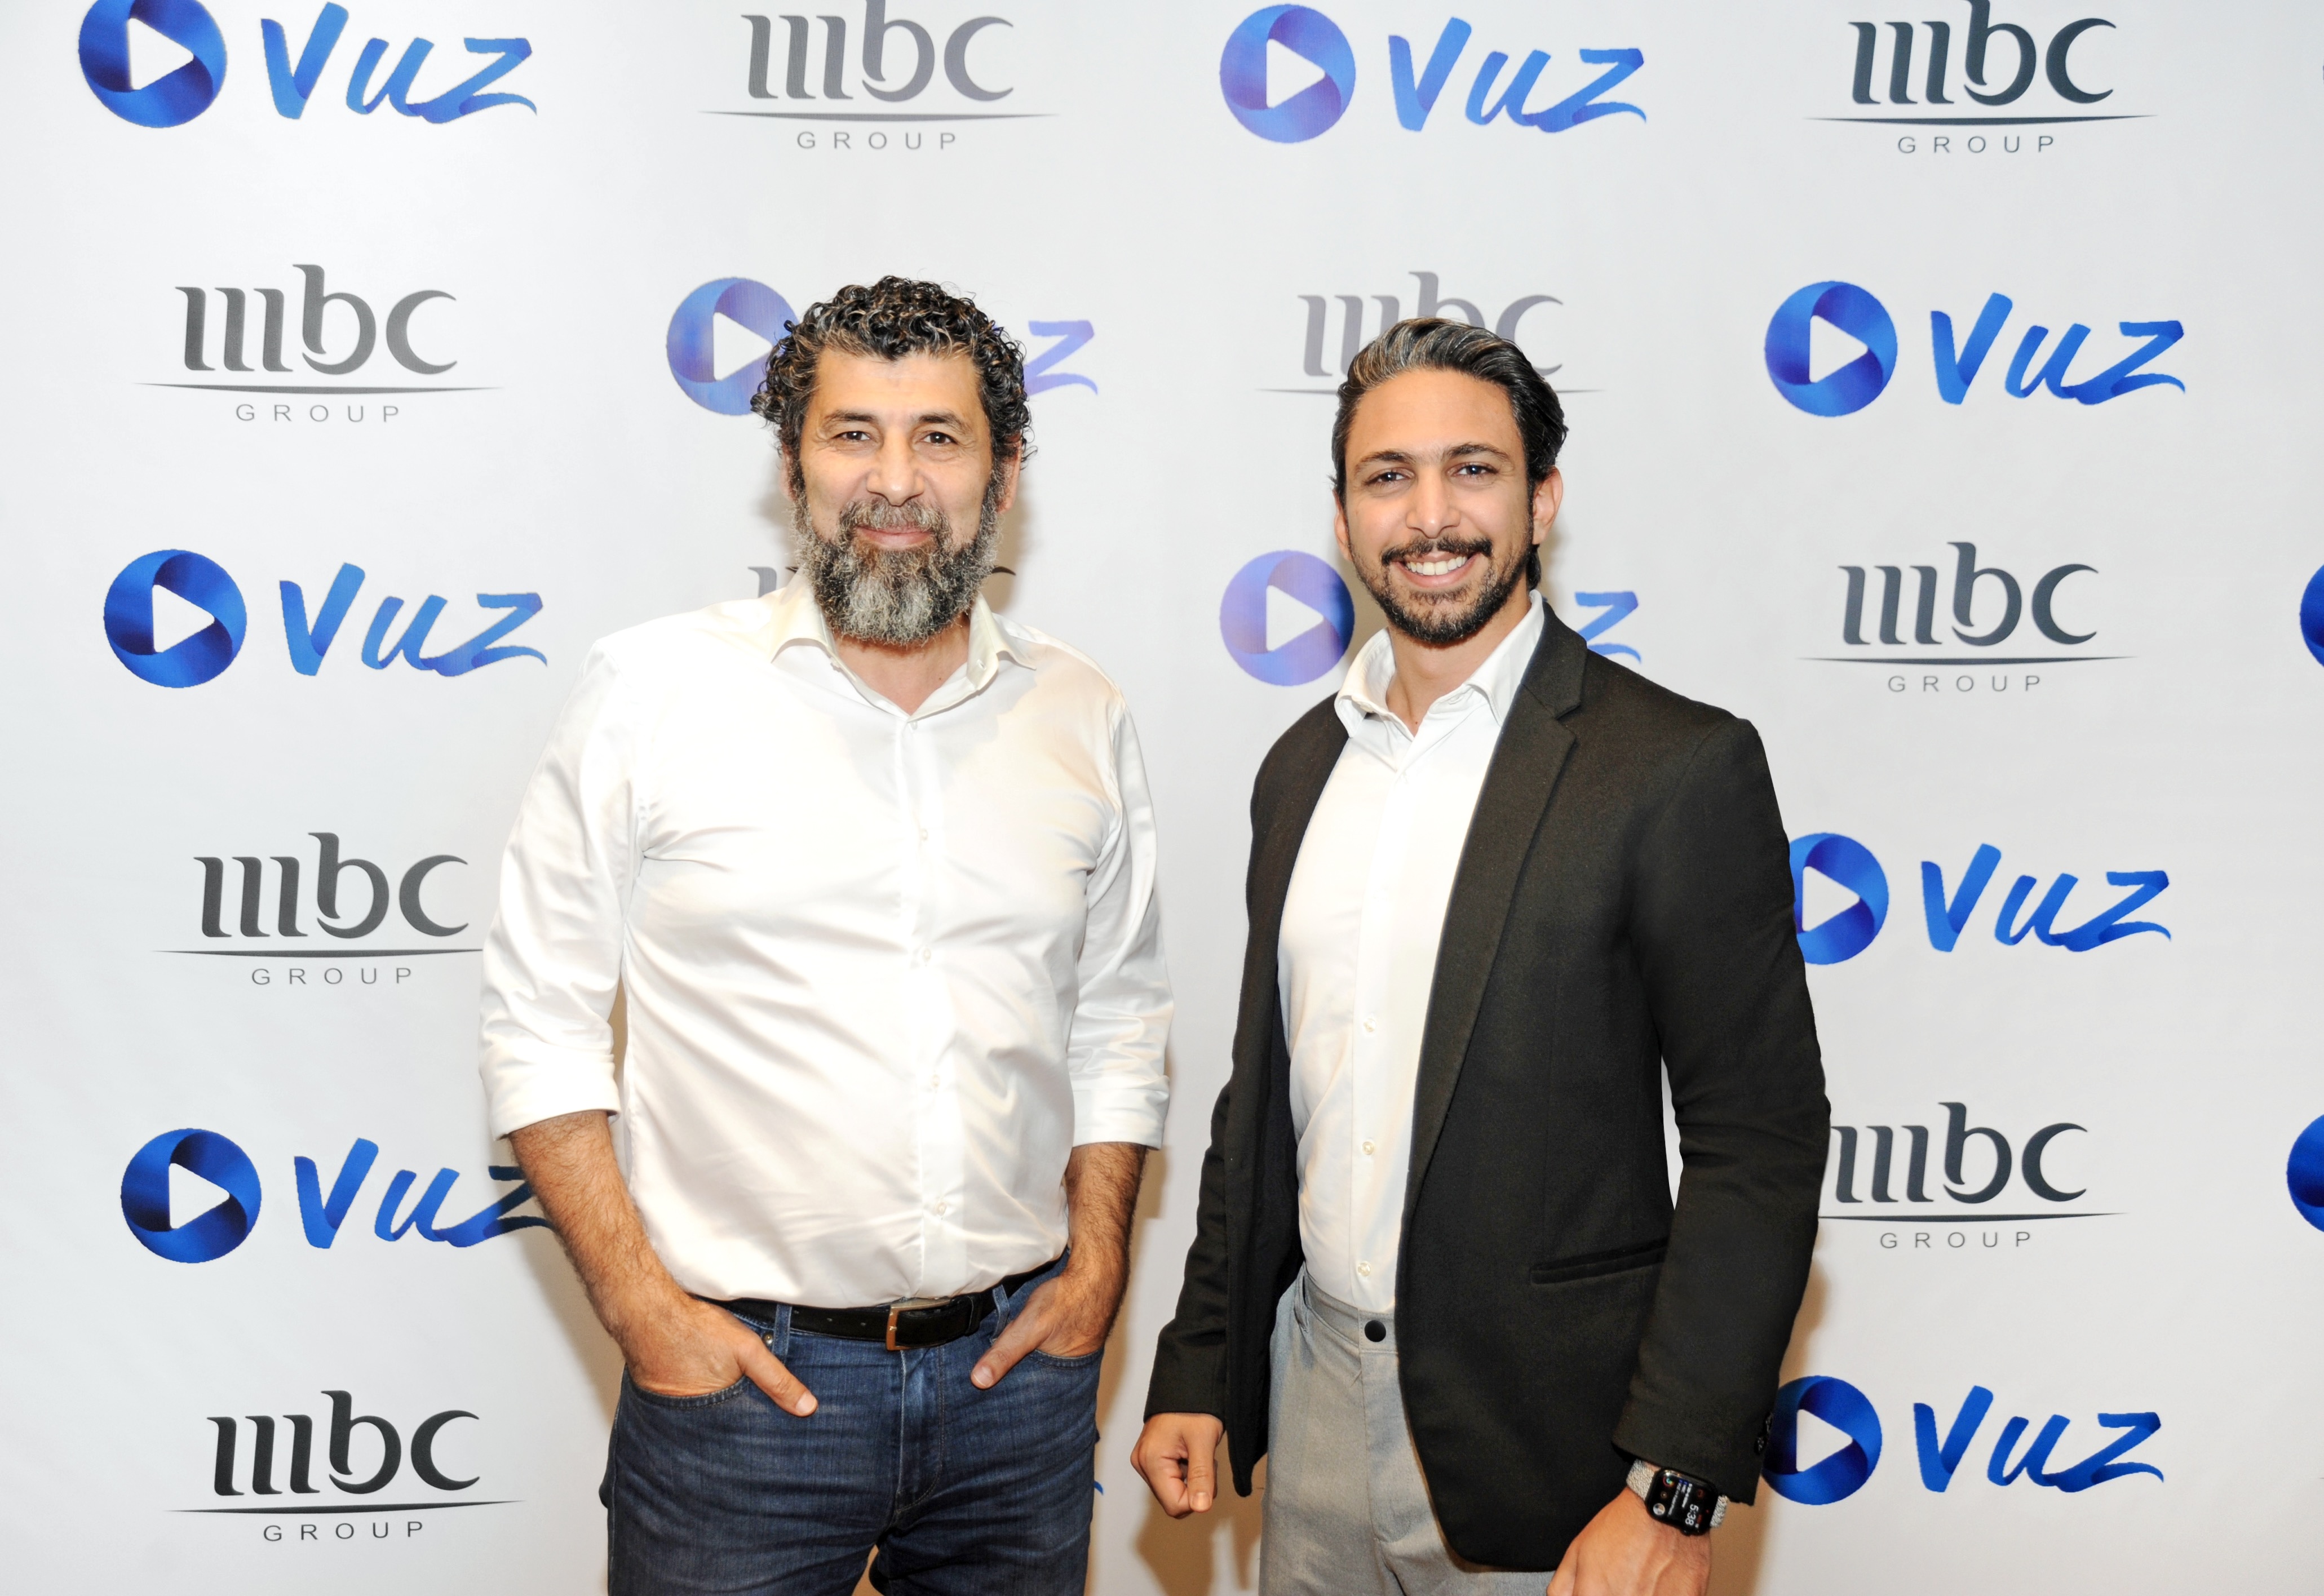 VUZ Partners with MBC Group to Expand its Video Content Offerings & XR Experiences